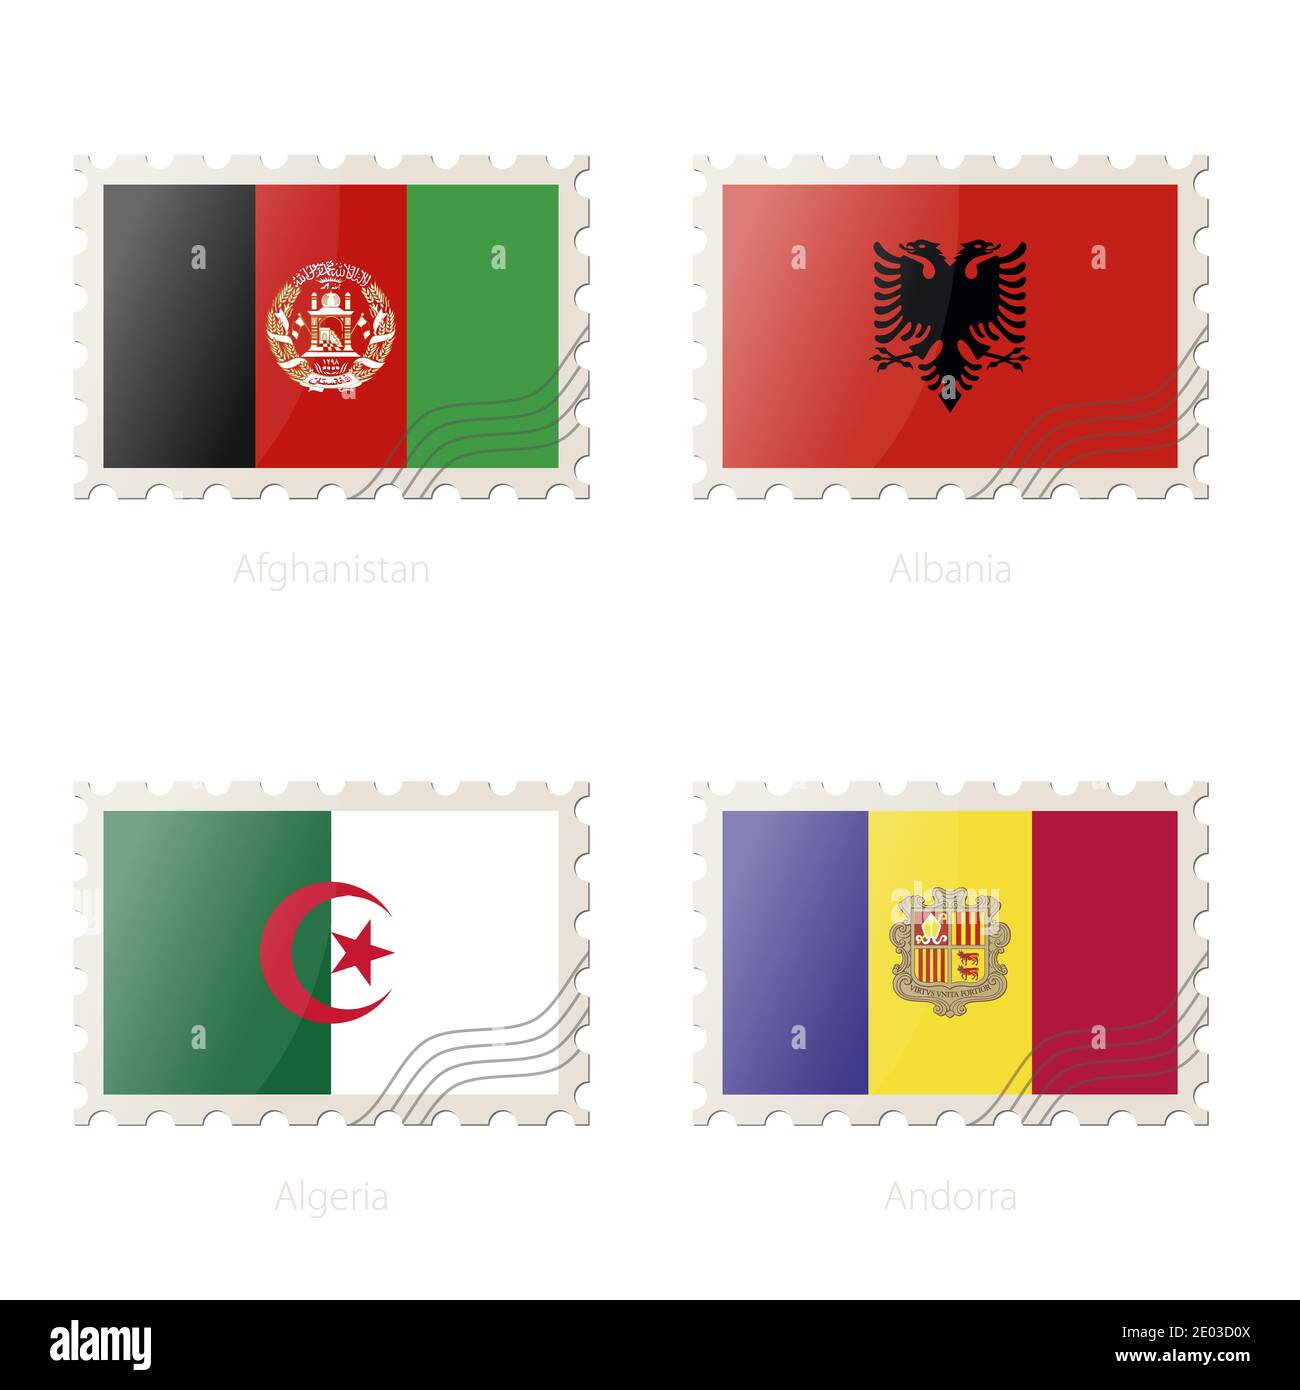 Postage stamp with the image of Afghanistan, Albania, Algeria, Andorra flag. Afghanistan, Albania, Algeria, Andorra Flag Postage on white background w Stock Vector